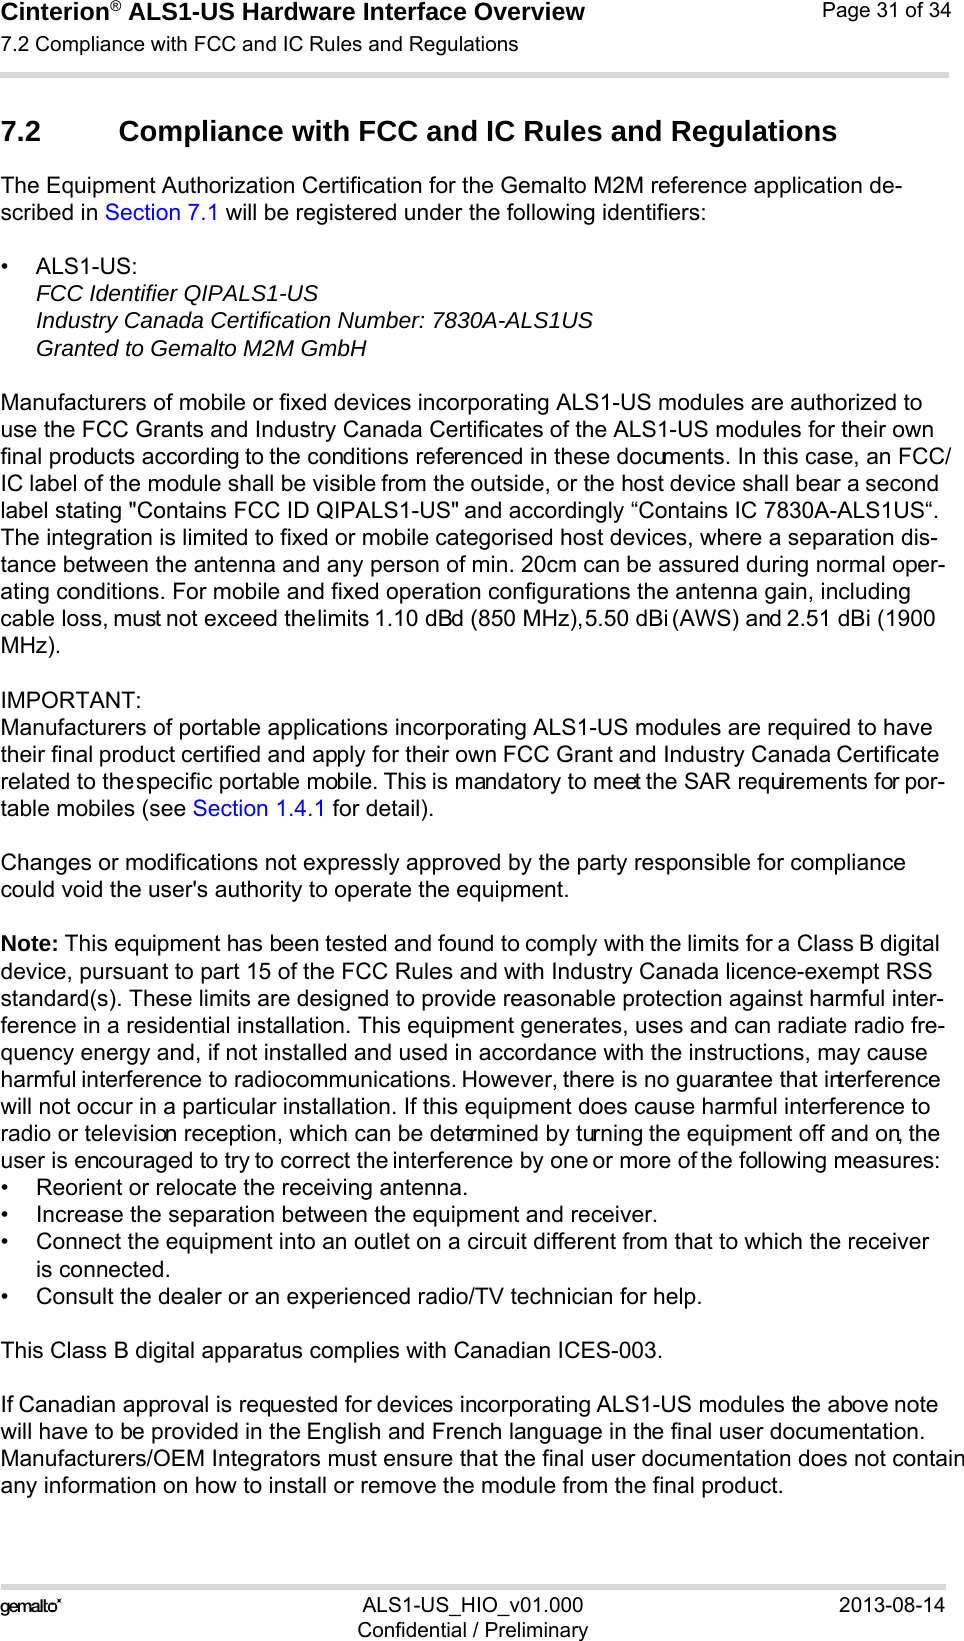 Cinterion® ALS1-US Hardware Interface Overview7.2 Compliance with FCC and IC Rules and Regulations31ALS1-US_HIO_v01.000 2013-08-14Confidential / PreliminaryPage 31 of 347.2 Compliance with FCC and IC Rules and Regulations The Equipment Authorization Certification for the Gemalto M2M reference application de-scribed in Section 7.1 will be registered under the following identifiers:•ALS1-US:FCC Identifier QIPALS1-USIndustry Canada Certification Number: 7830A-ALS1USGranted to Gemalto M2M GmbHManufacturers of mobile or fixed devices incorporating ALS1-US modules are authorized to use the FCC Grants and Industry Canada Certificates of the ALS1-US modules for their own final products according to the conditions referenced in these documents. In this case, an FCC/IC label of the module shall be visible from the outside, or the host device shall bear a second label stating &quot;Contains FCC ID QIPALS1-US&quot; and accordingly “Contains IC 7830A-ALS1US“. The integration is limited to fixed or mobile categorised host devices, where a separation dis-tance between the antenna and any person of min. 20cm can be assured during normal oper-ating conditions. For mobile and fixed operation configurations the antenna gain, including cable loss, must not exceed the limits 1.10 dBd (850 MHz), 5.50 dBi (AWS) and 2.51 dBi (1900 MHz).IMPORTANT:Manufacturers of portable applications incorporating ALS1-US modules are required to have their final product certified and apply for their own FCC Grant and Industry Canada Certificate related to the specific portable mobile. This is mandatory to meet the SAR requirements for por-table mobiles (see Section 1.4.1 for detail).Changes or modifications not expressly approved by the party responsible for compliance could void the user&apos;s authority to operate the equipment.Note: This equipment has been tested and found to comply with the limits for a Class B digital device, pursuant to part 15 of the FCC Rules and with Industry Canada licence-exempt RSS standard(s). These limits are designed to provide reasonable protection against harmful inter-ference in a residential installation. This equipment generates, uses and can radiate radio fre-quency energy and, if not installed and used in accordance with the instructions, may cause harmful interference to radio communications. However, there is no guarantee that interference will not occur in a particular installation. If this equipment does cause harmful interference to radio or television reception, which can be determined by turning the equipment off and on, the user is encouraged to try to correct the interference by one or more of the following measures: • Reorient or relocate the receiving antenna.• Increase the separation between the equipment and receiver.• Connect the equipment into an outlet on a circuit different from that to which the receiveris connected.• Consult the dealer or an experienced radio/TV technician for help.This Class B digital apparatus complies with Canadian ICES-003.If Canadian approval is requested for devices incorporating ALS1-US modules the above note will have to be provided in the English and French language in the final user documentation. Manufacturers/OEM Integrators must ensure that the final user documentation does not contain any information on how to install or remove the module from the final product.